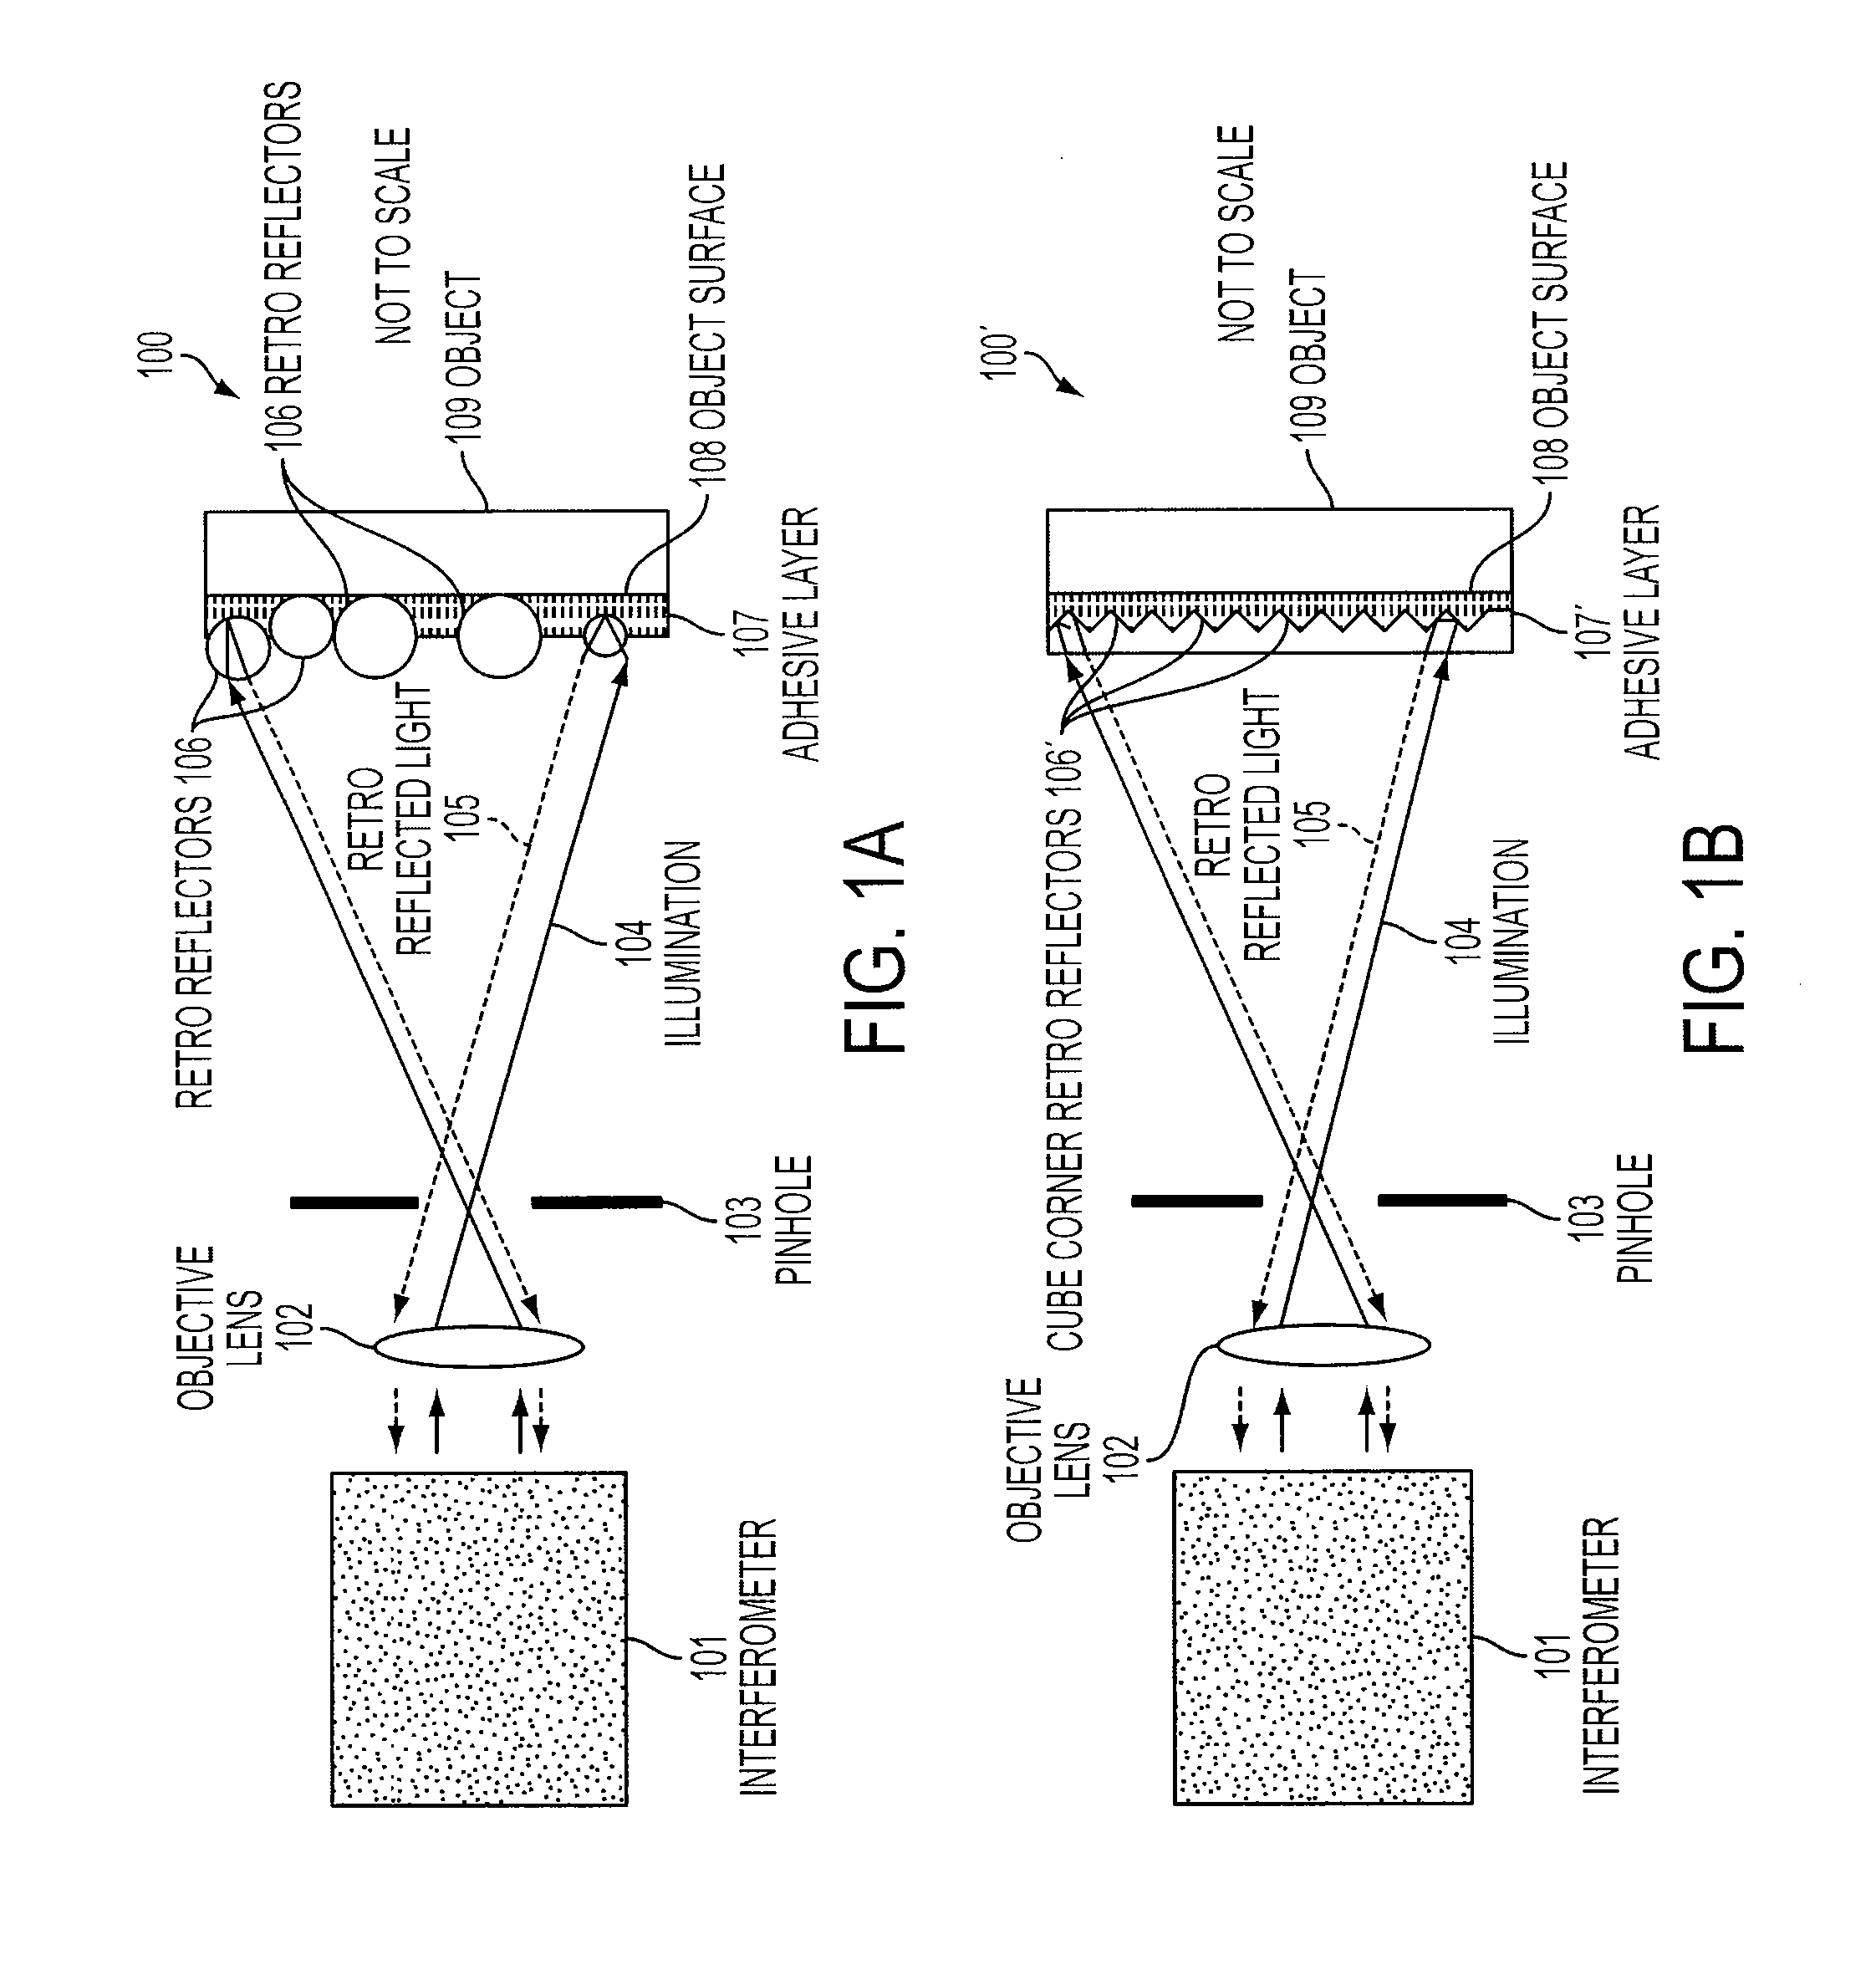 Surface deformation measuring system with a retro-reflective surface treatment